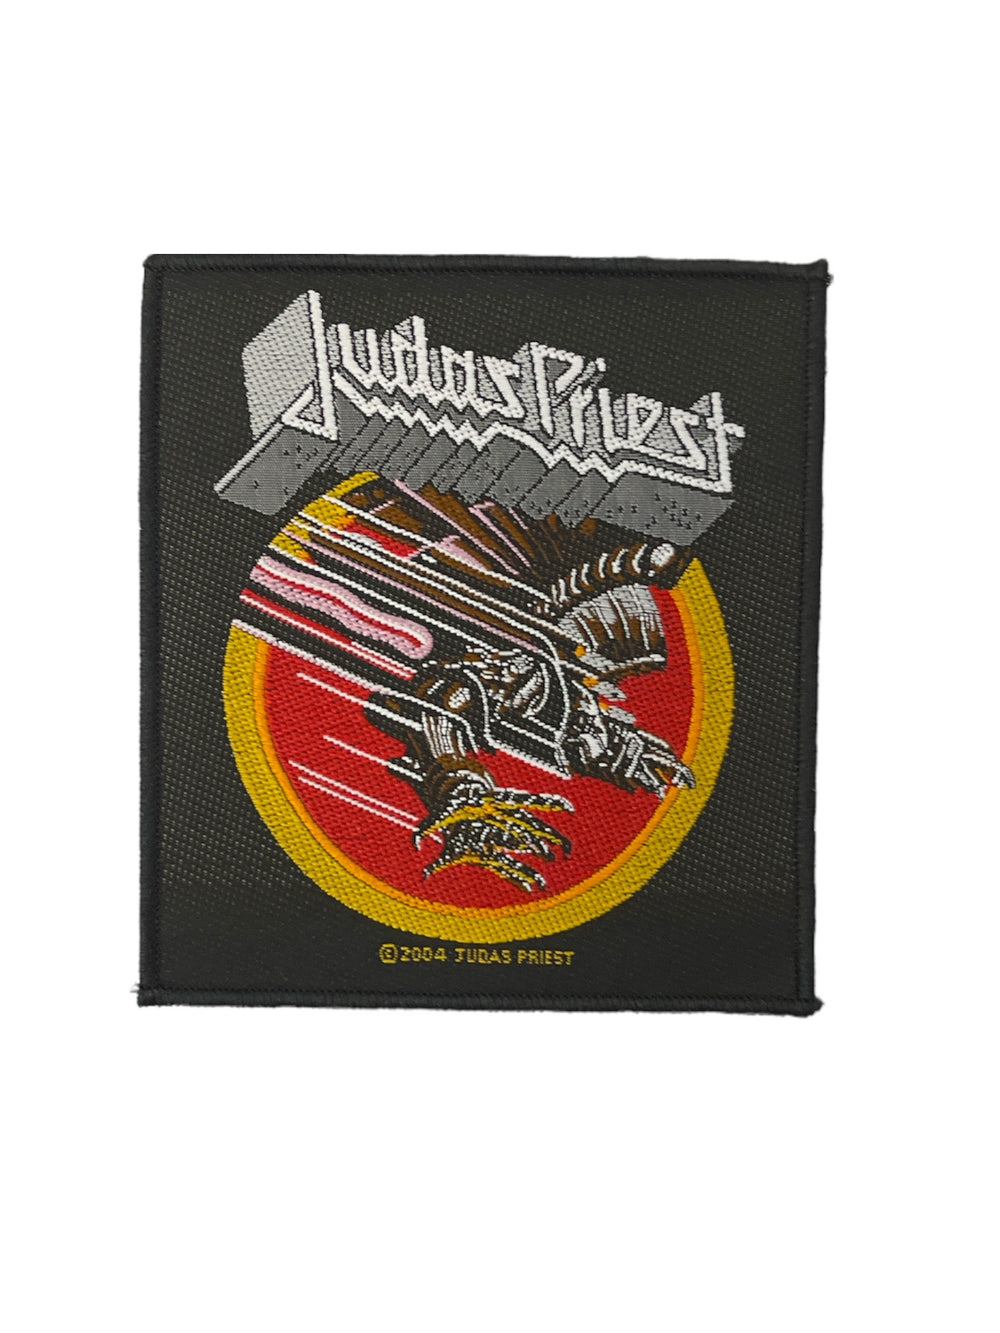 Judas Priest Vengeance Official Sew On Woven Patch Brand New